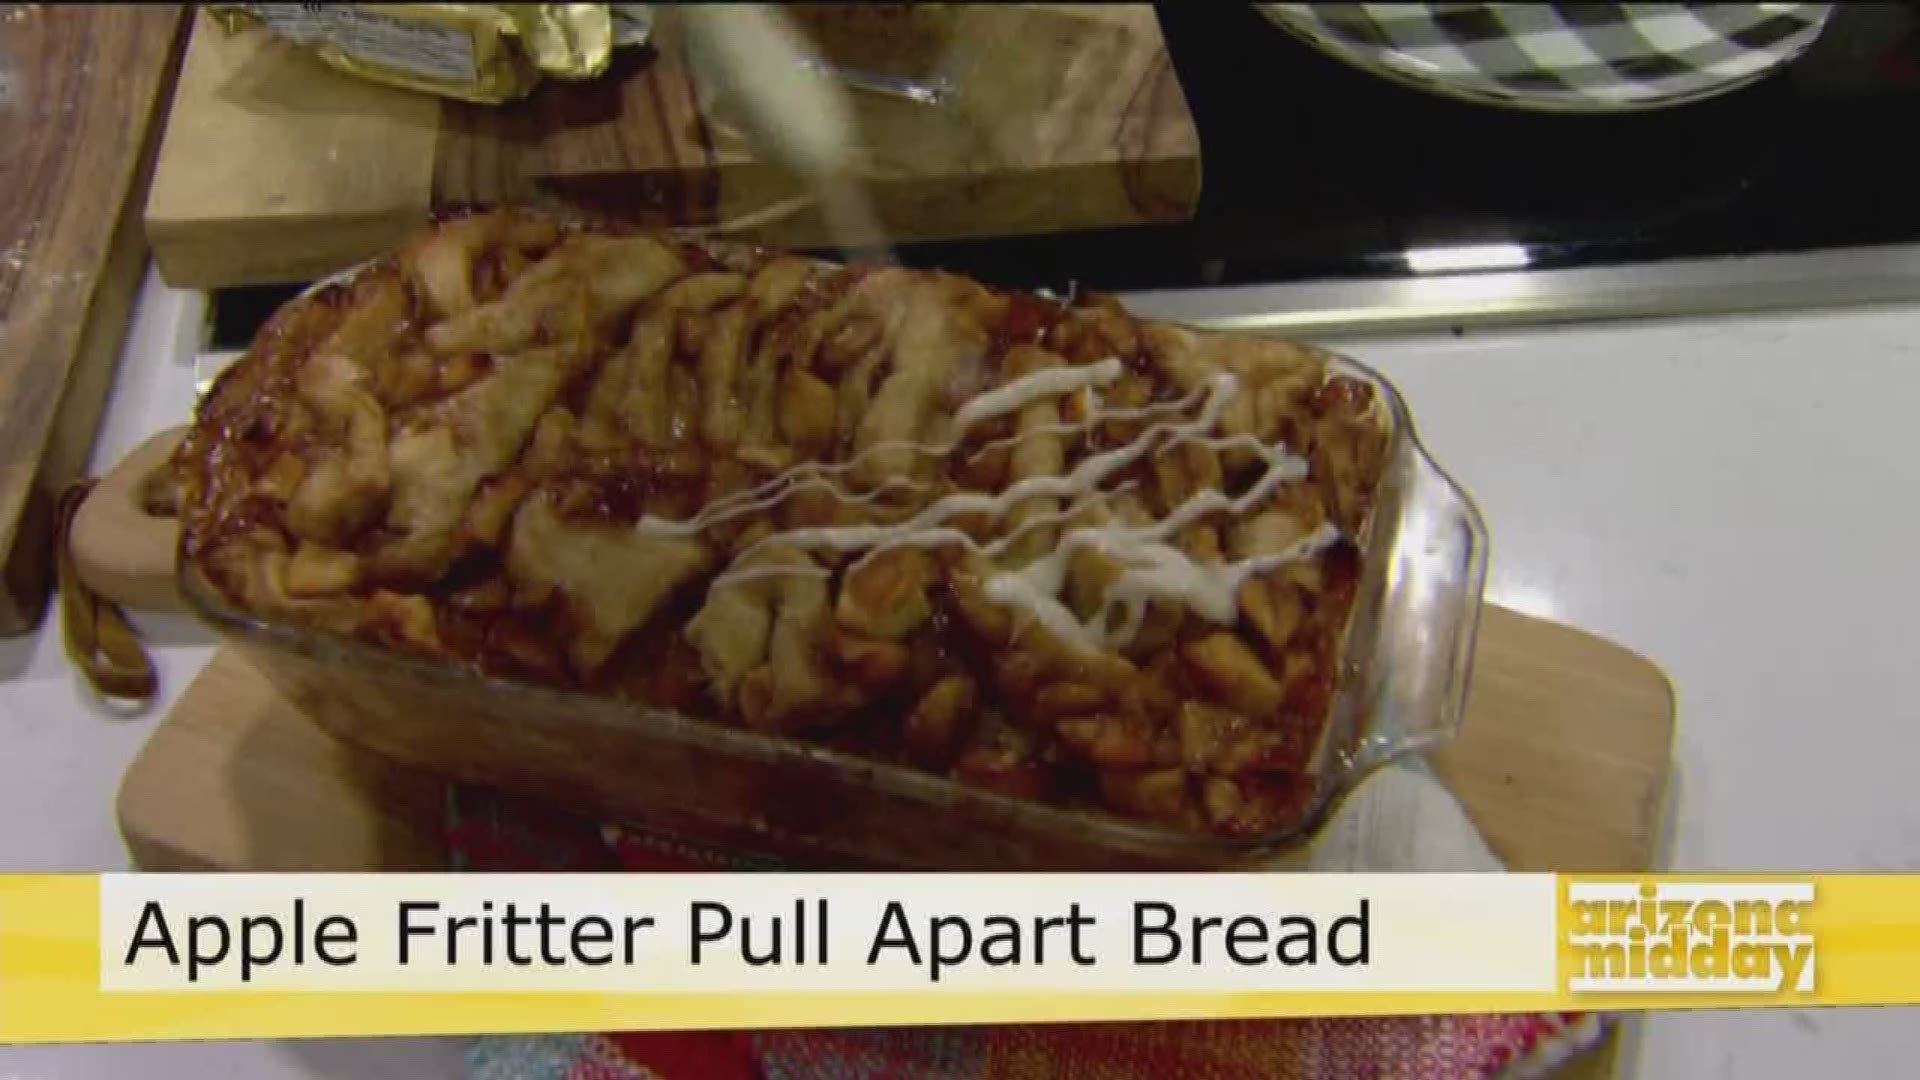 Jan makes delicious Apple Fritter Pull Apart Bread